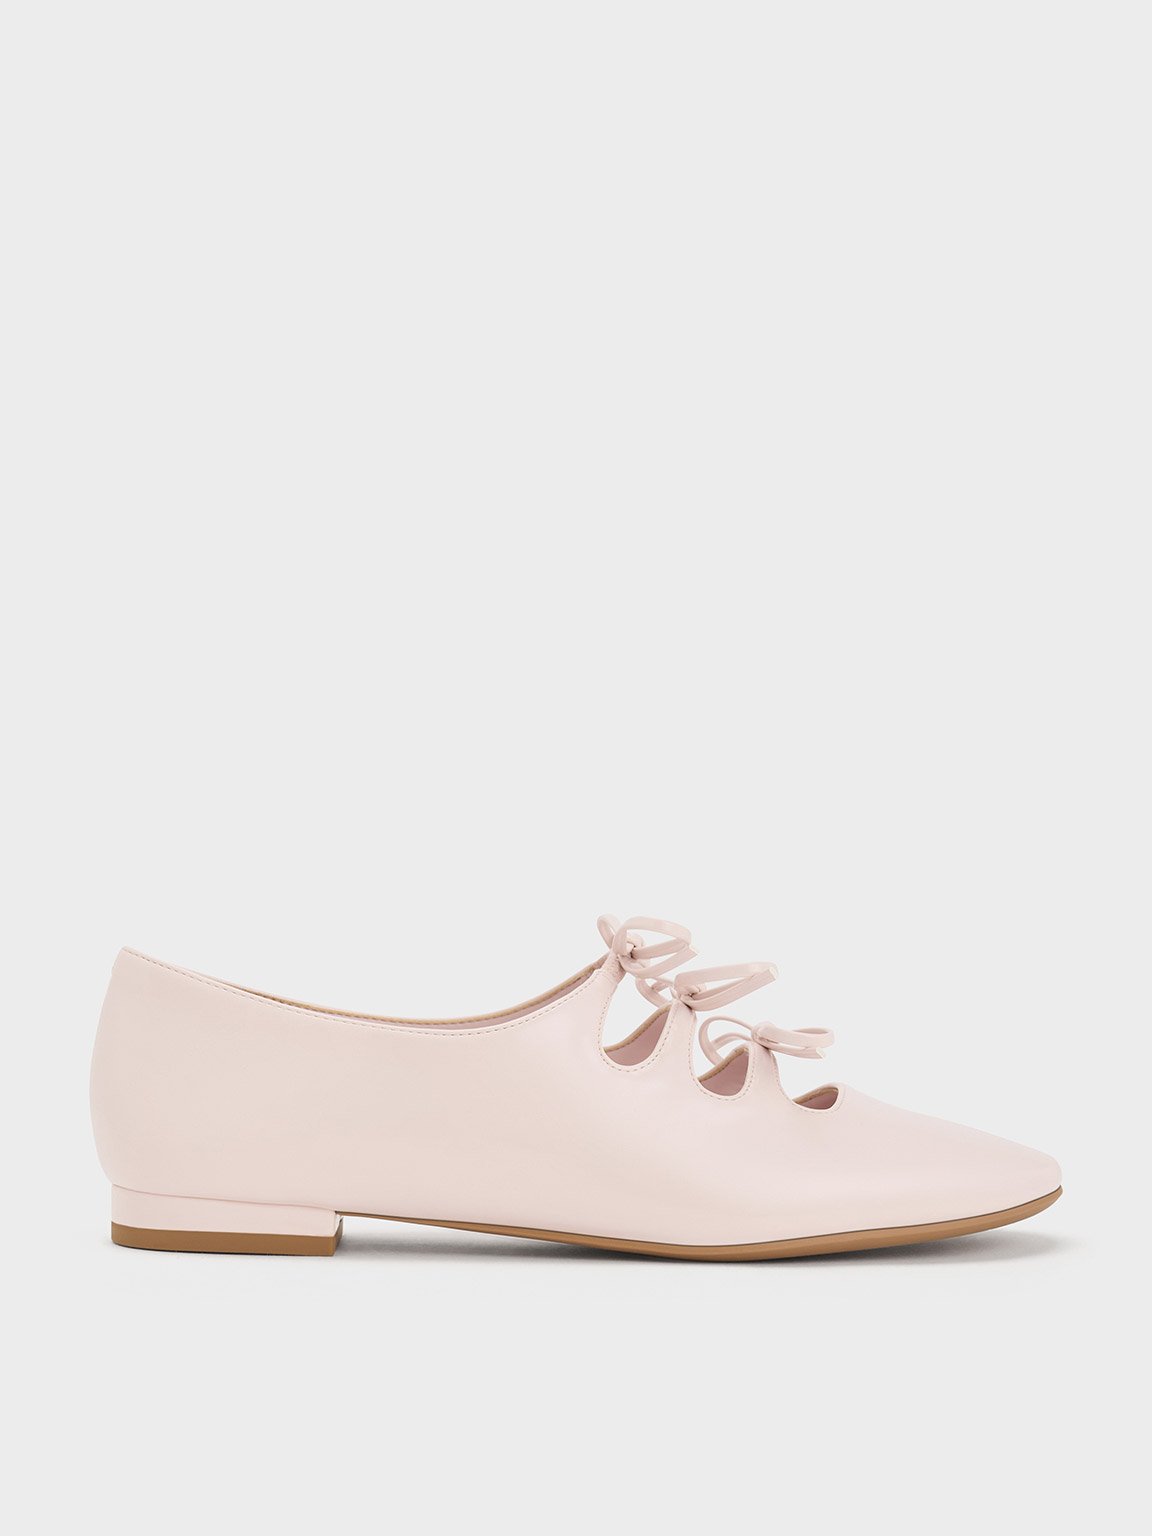 Charles & Keith Dorri Triple-bow Ballet Flats In Pink